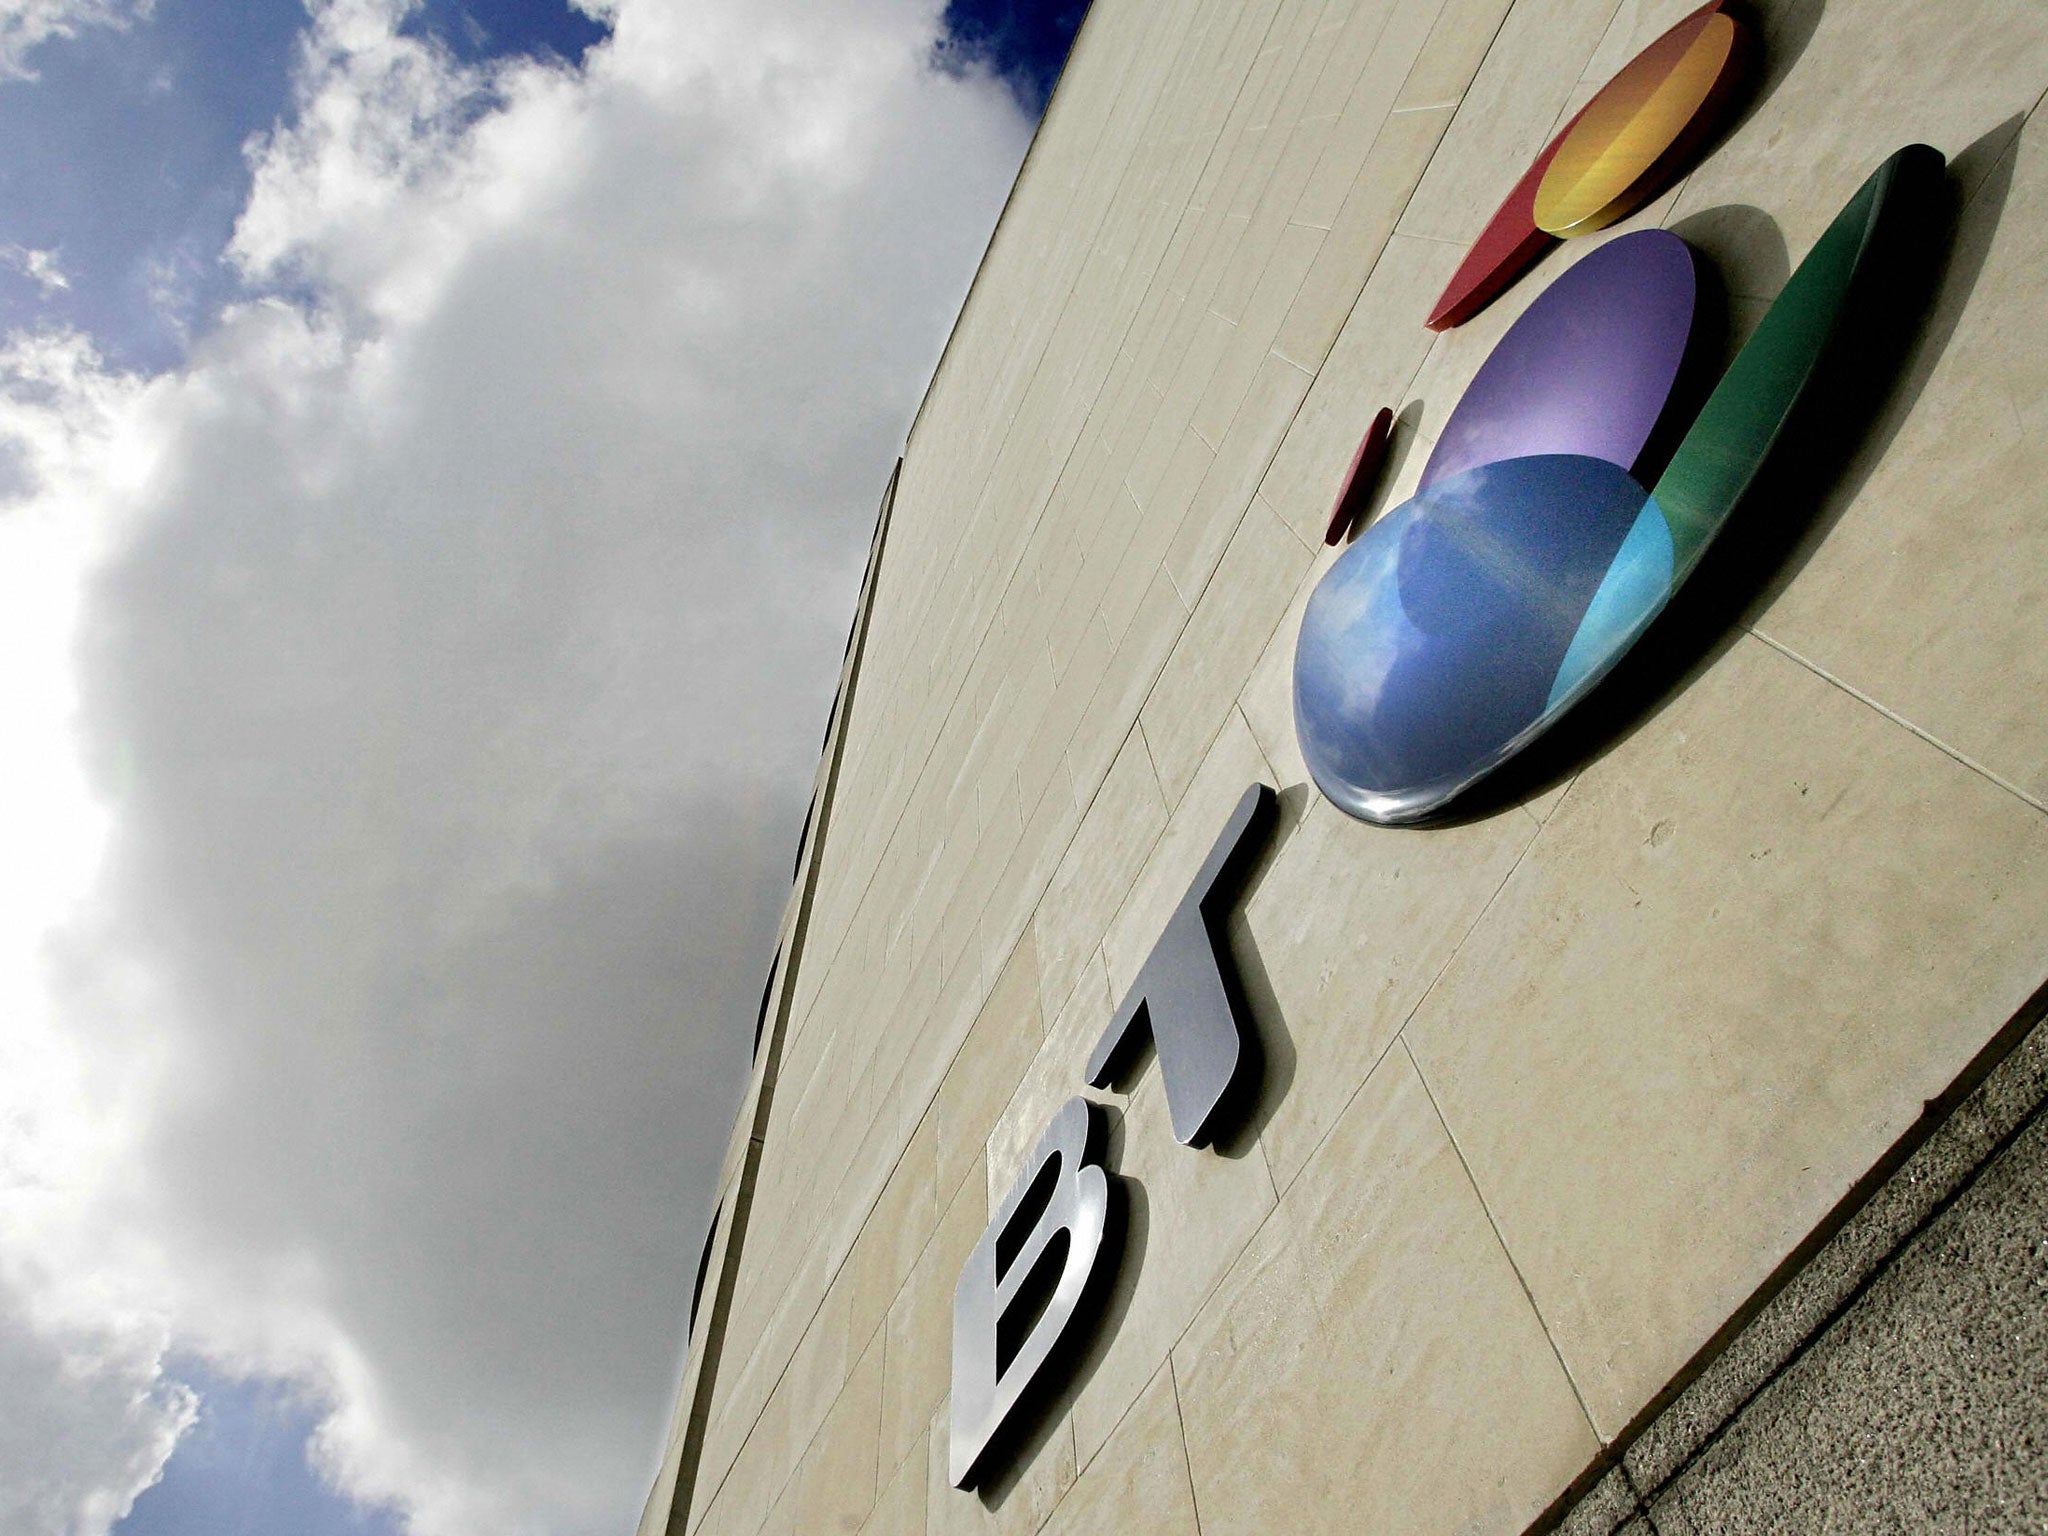 Six of Britain’s largest financial services firms are examining their involvement with BT after accusations that it inadvertently aided American drone strikes in Yemen and Somalia